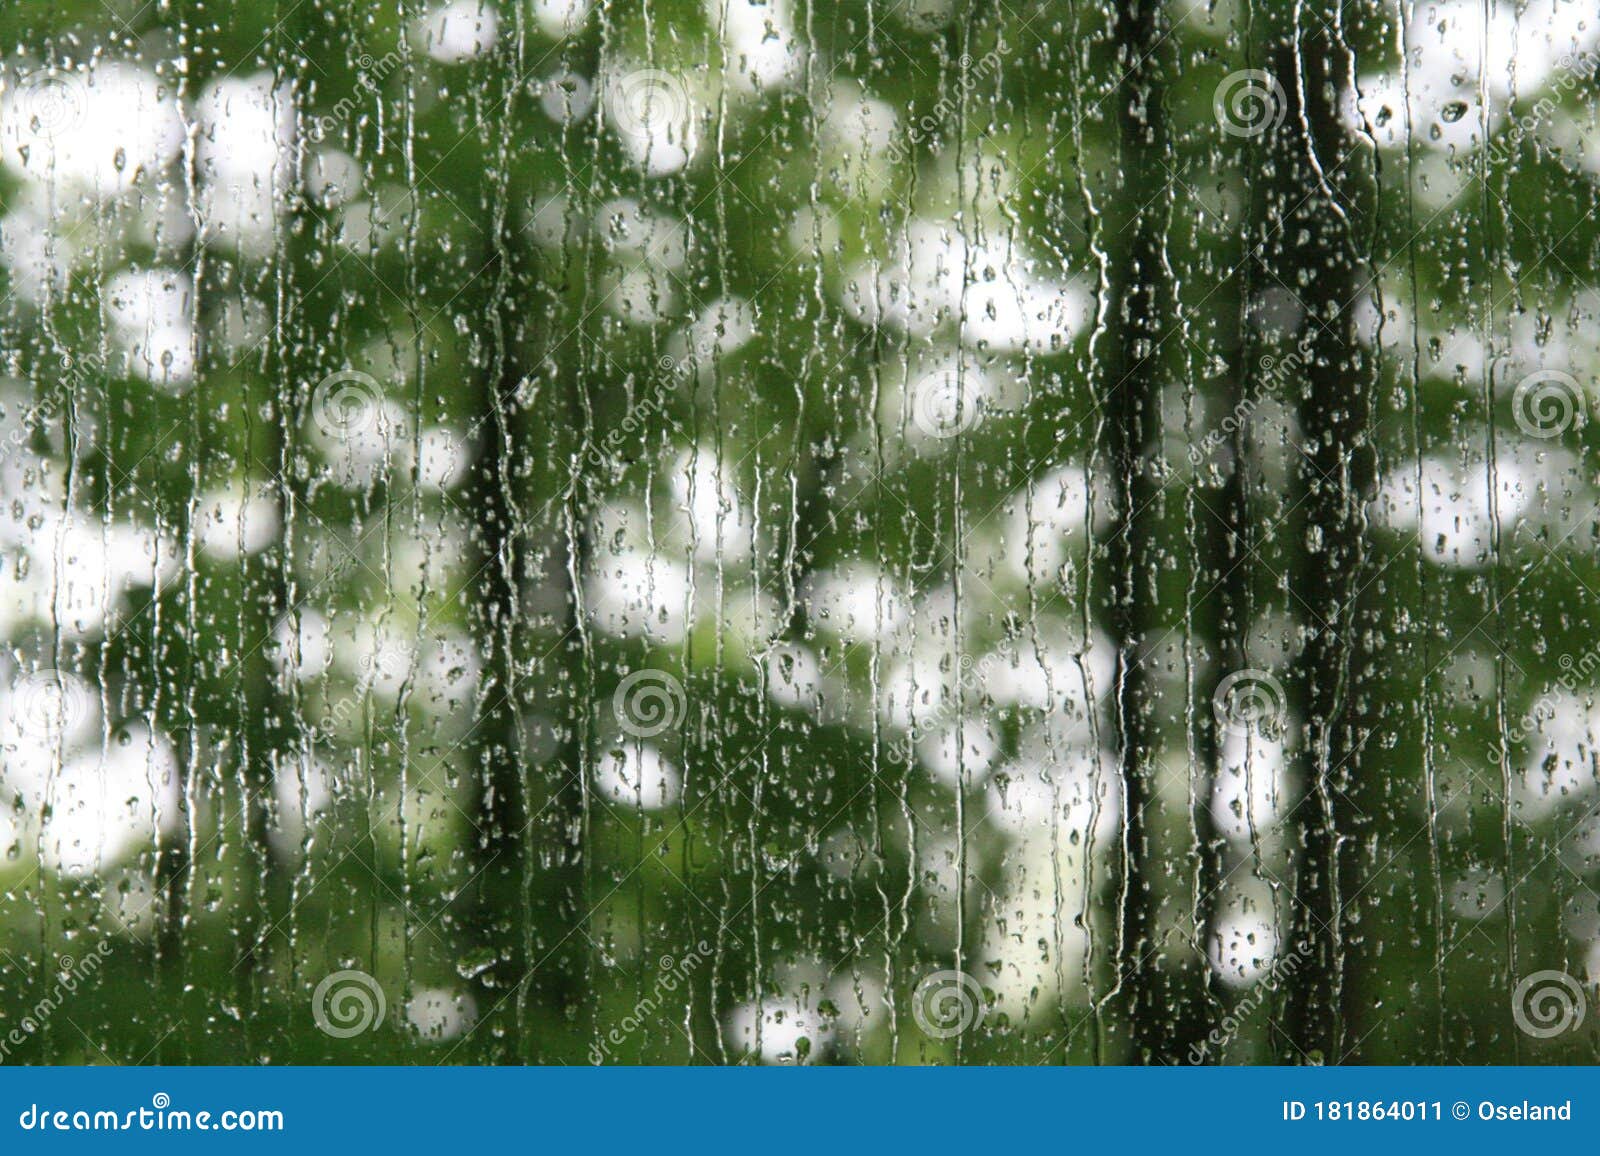 rain soaked window with green trees in summer.